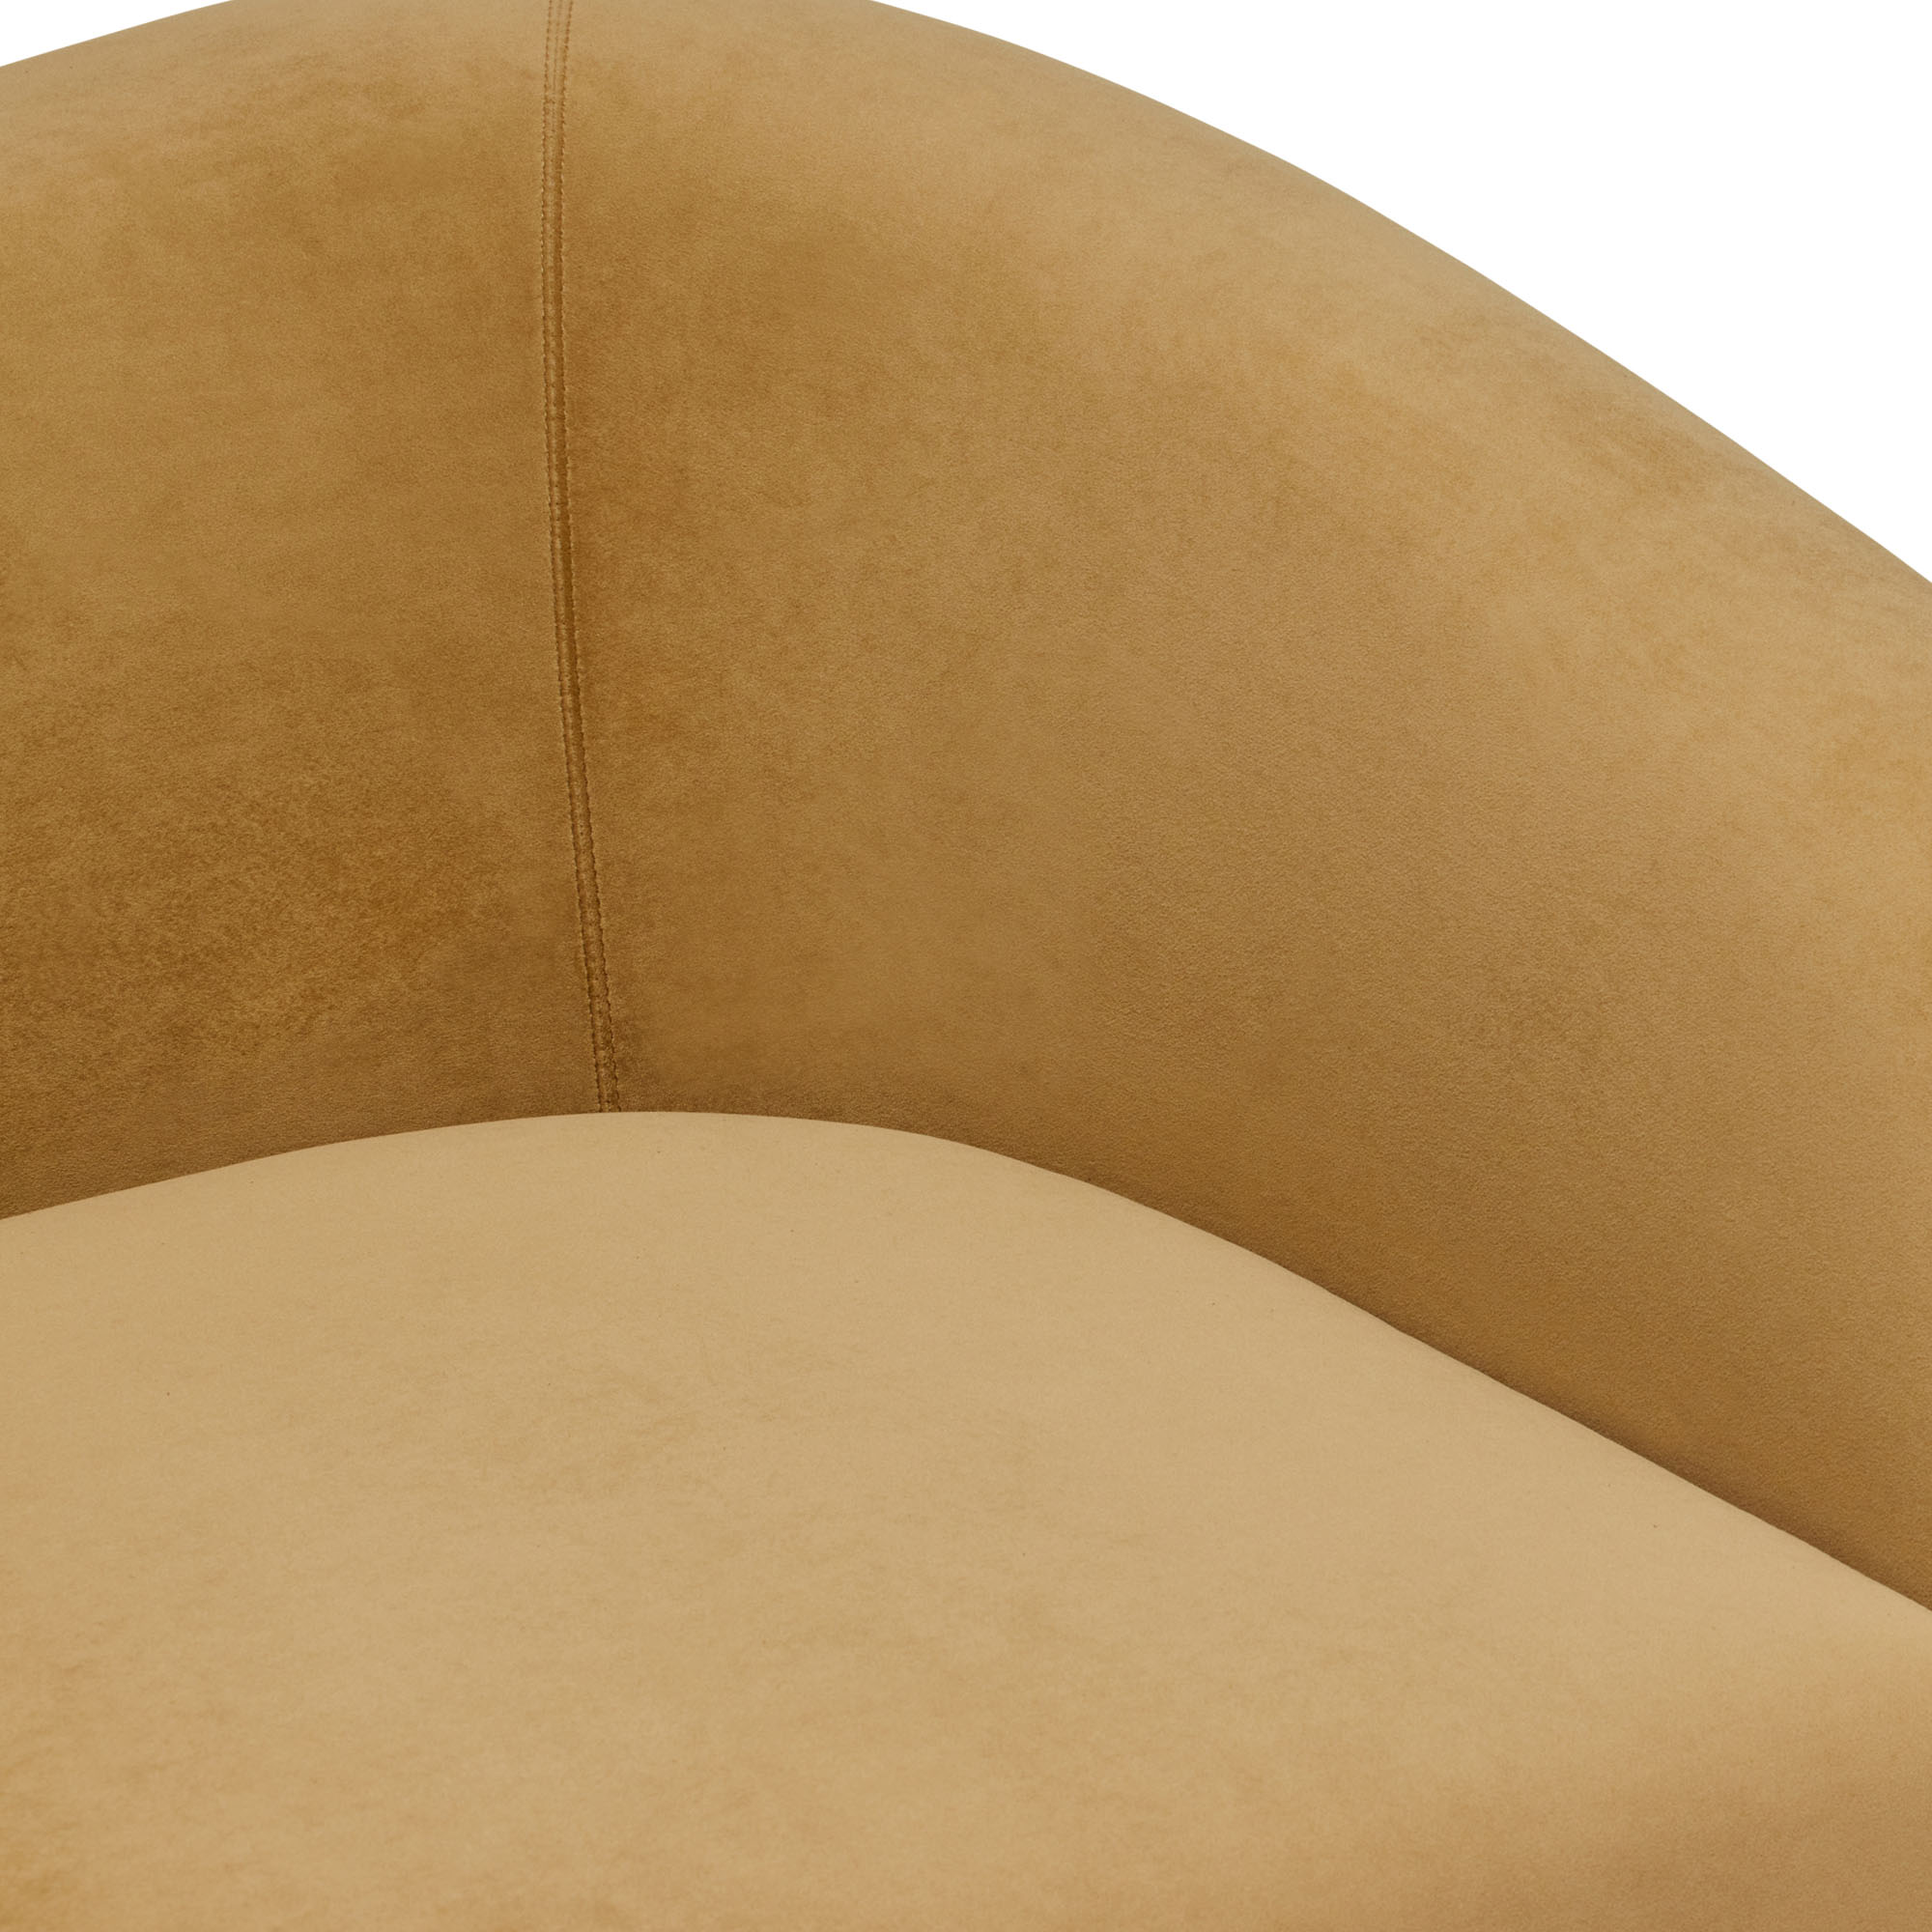 Muse Swivel Chair Sand